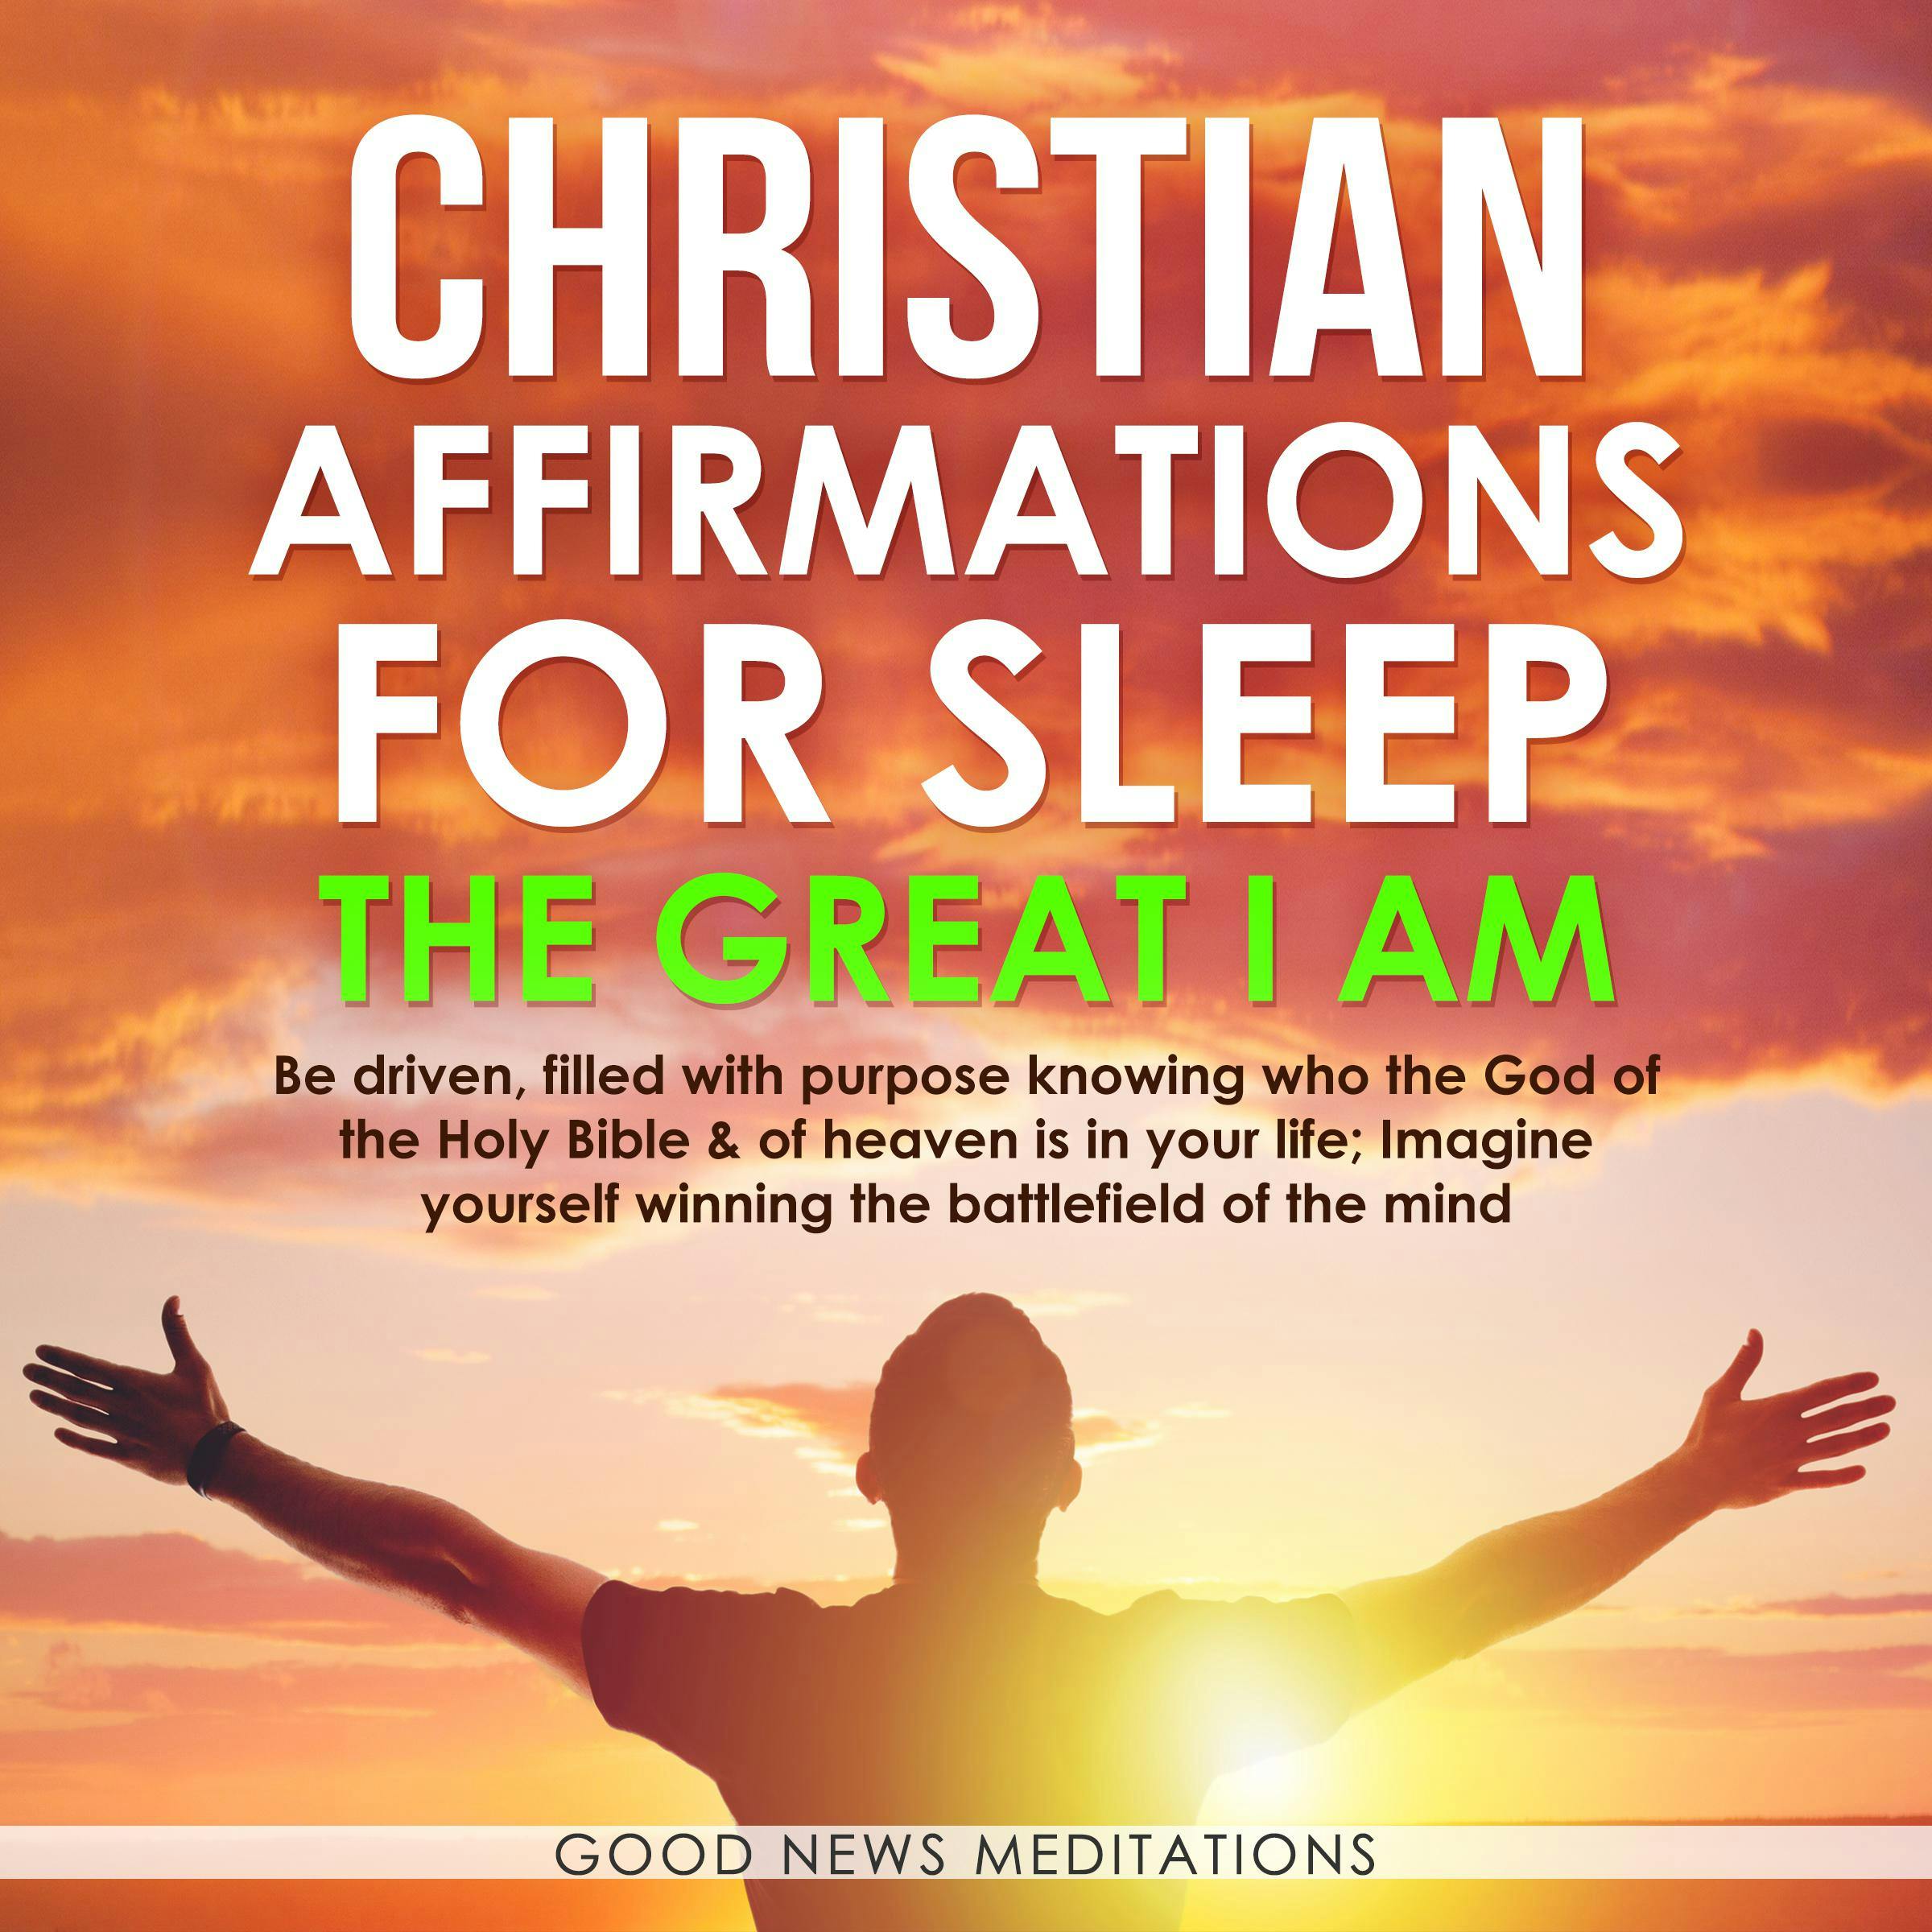 Christian Affirmations for Sleep - The Great I AM: Be driven, filled with purpose knowing who the God of the Holy Bible & of heaven is in your life; Imagine yourself winning the battlefield of the mind - undefined